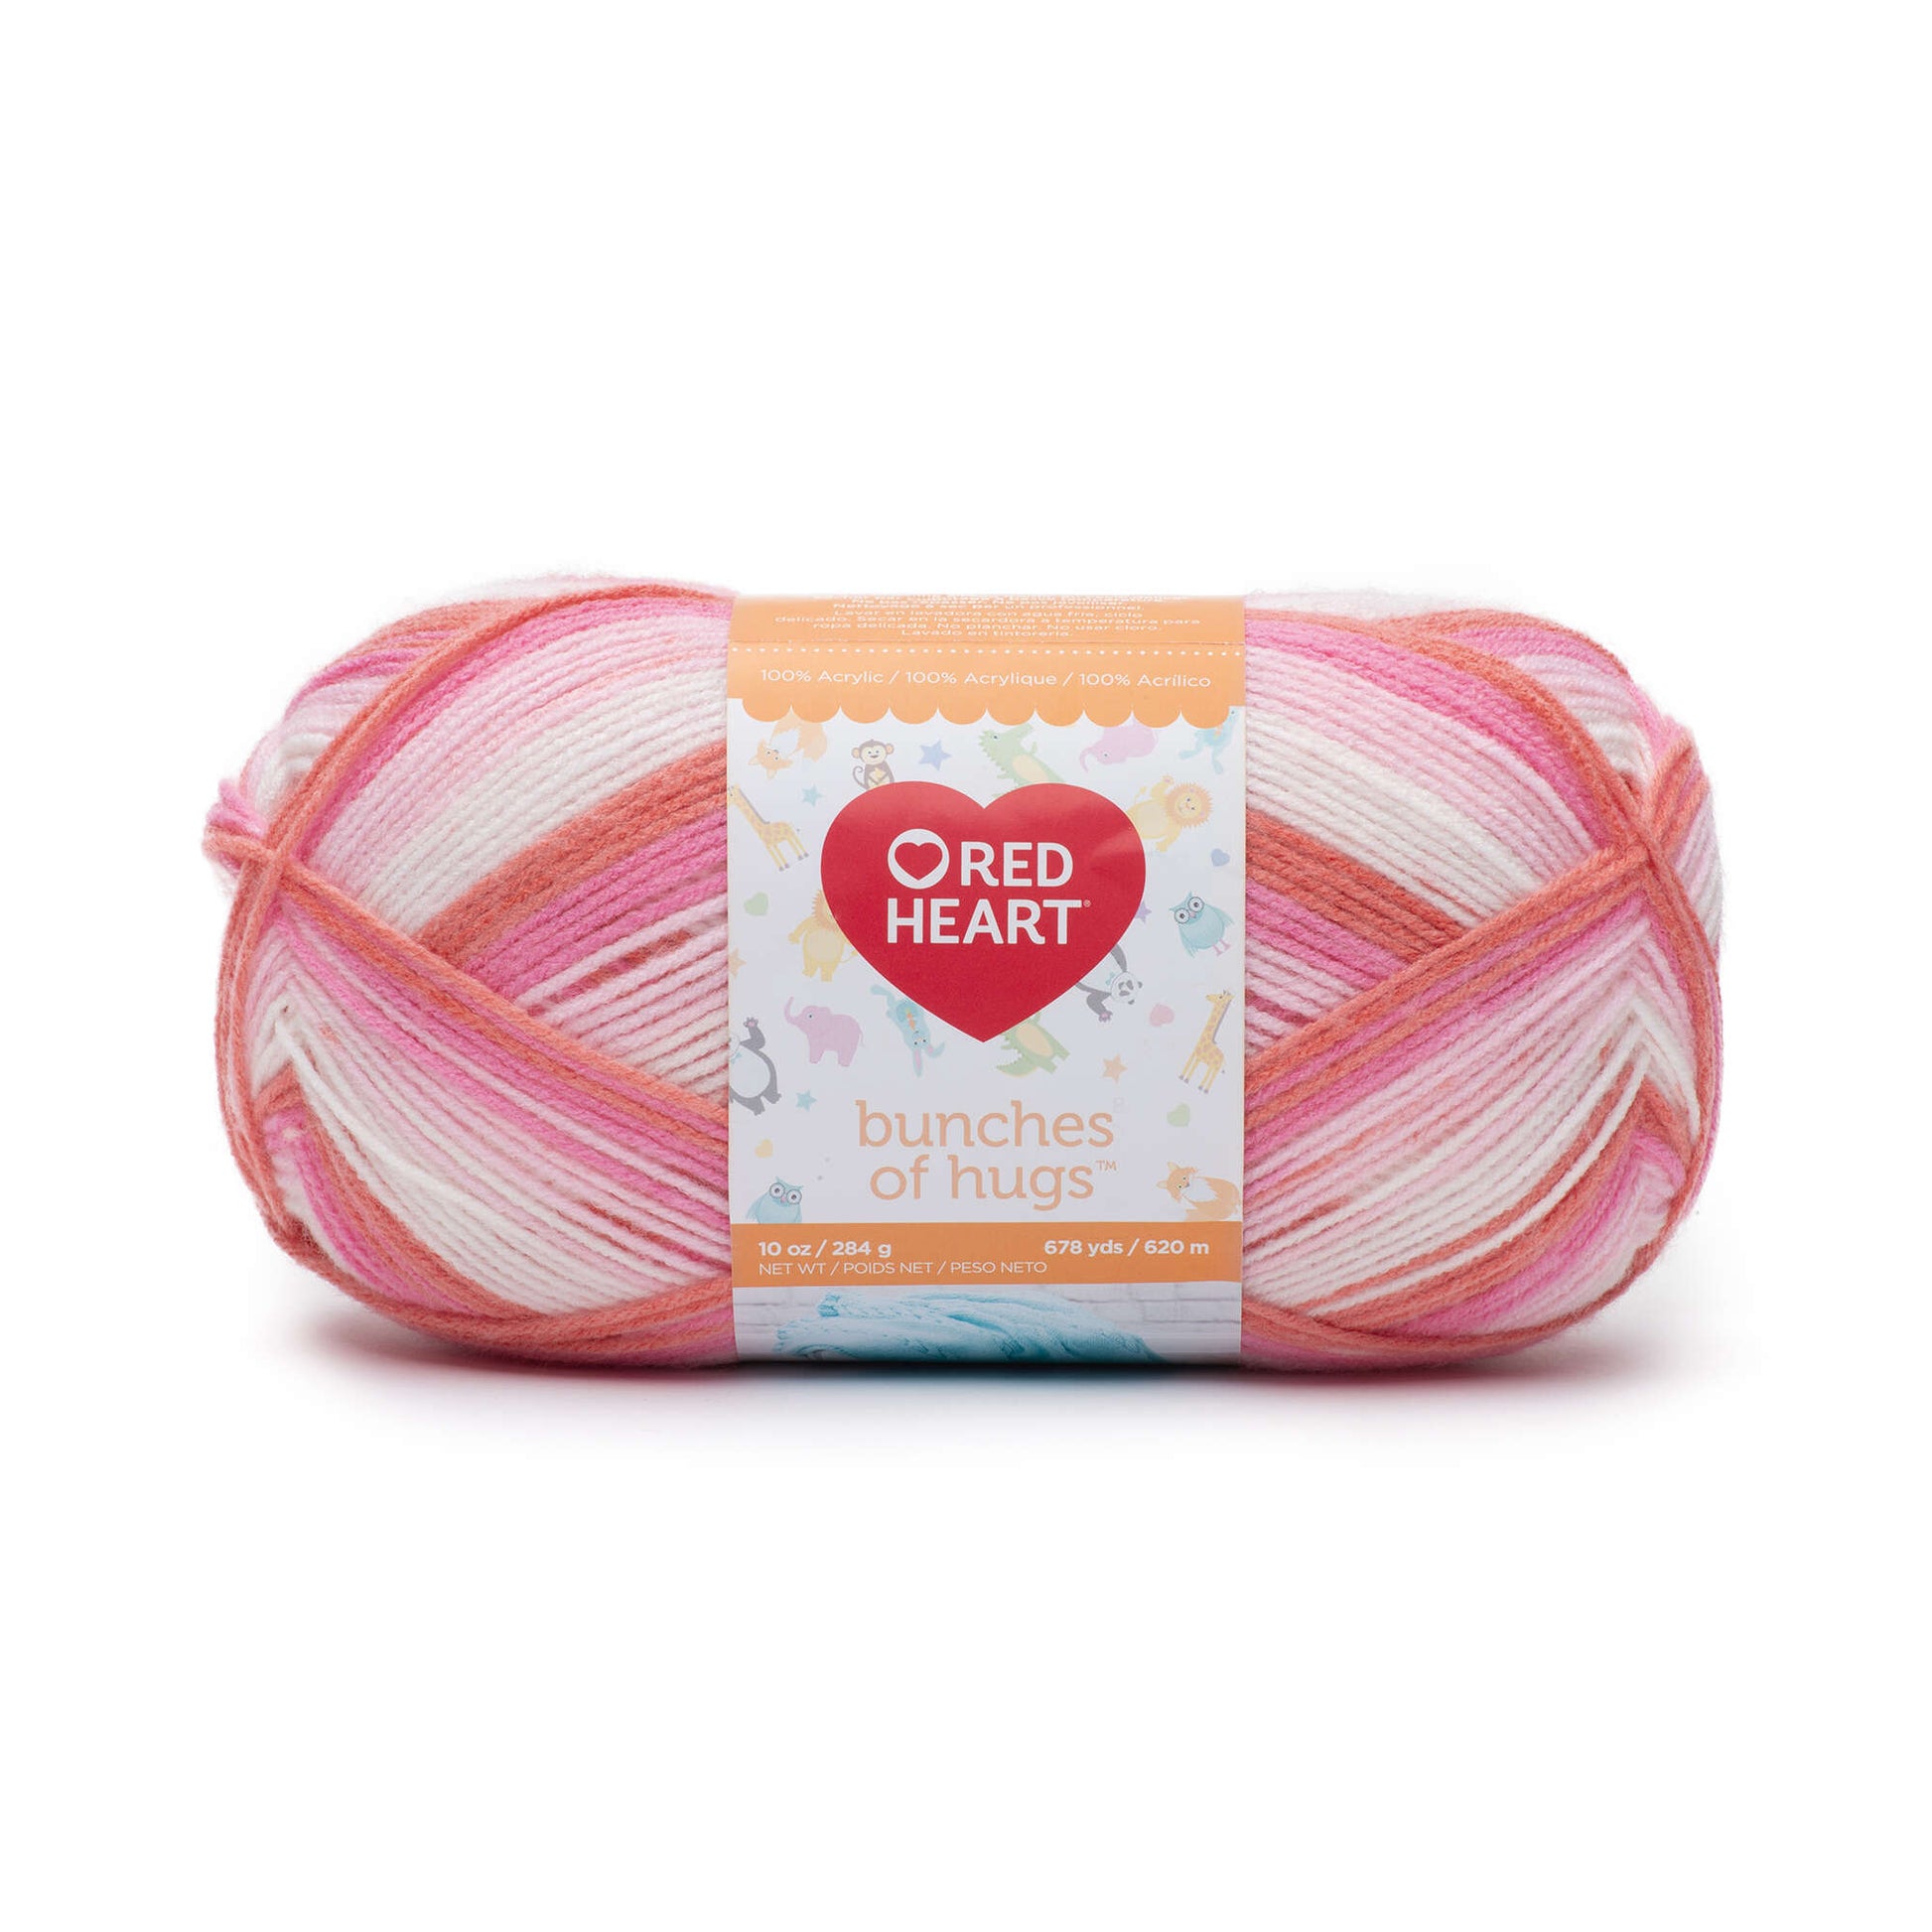 Red Heart Bunches of Hugs Yarn